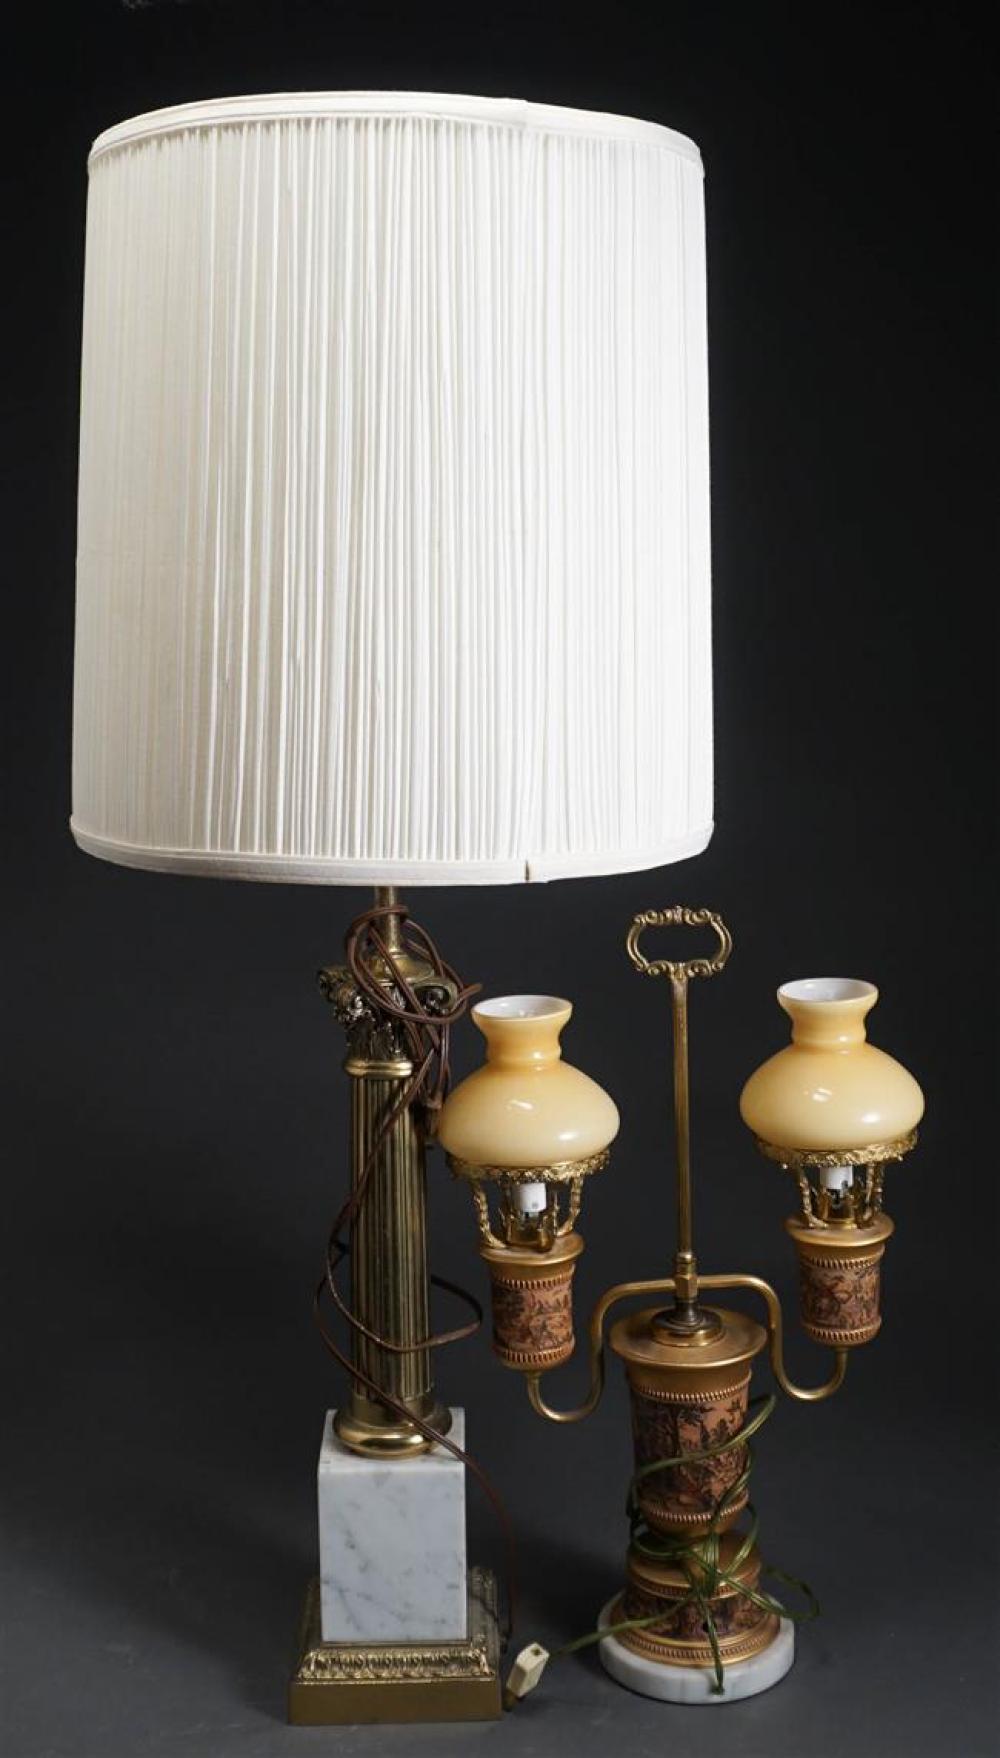 TWO EMPIRE STYLE TABLE LAMPS H 323da7